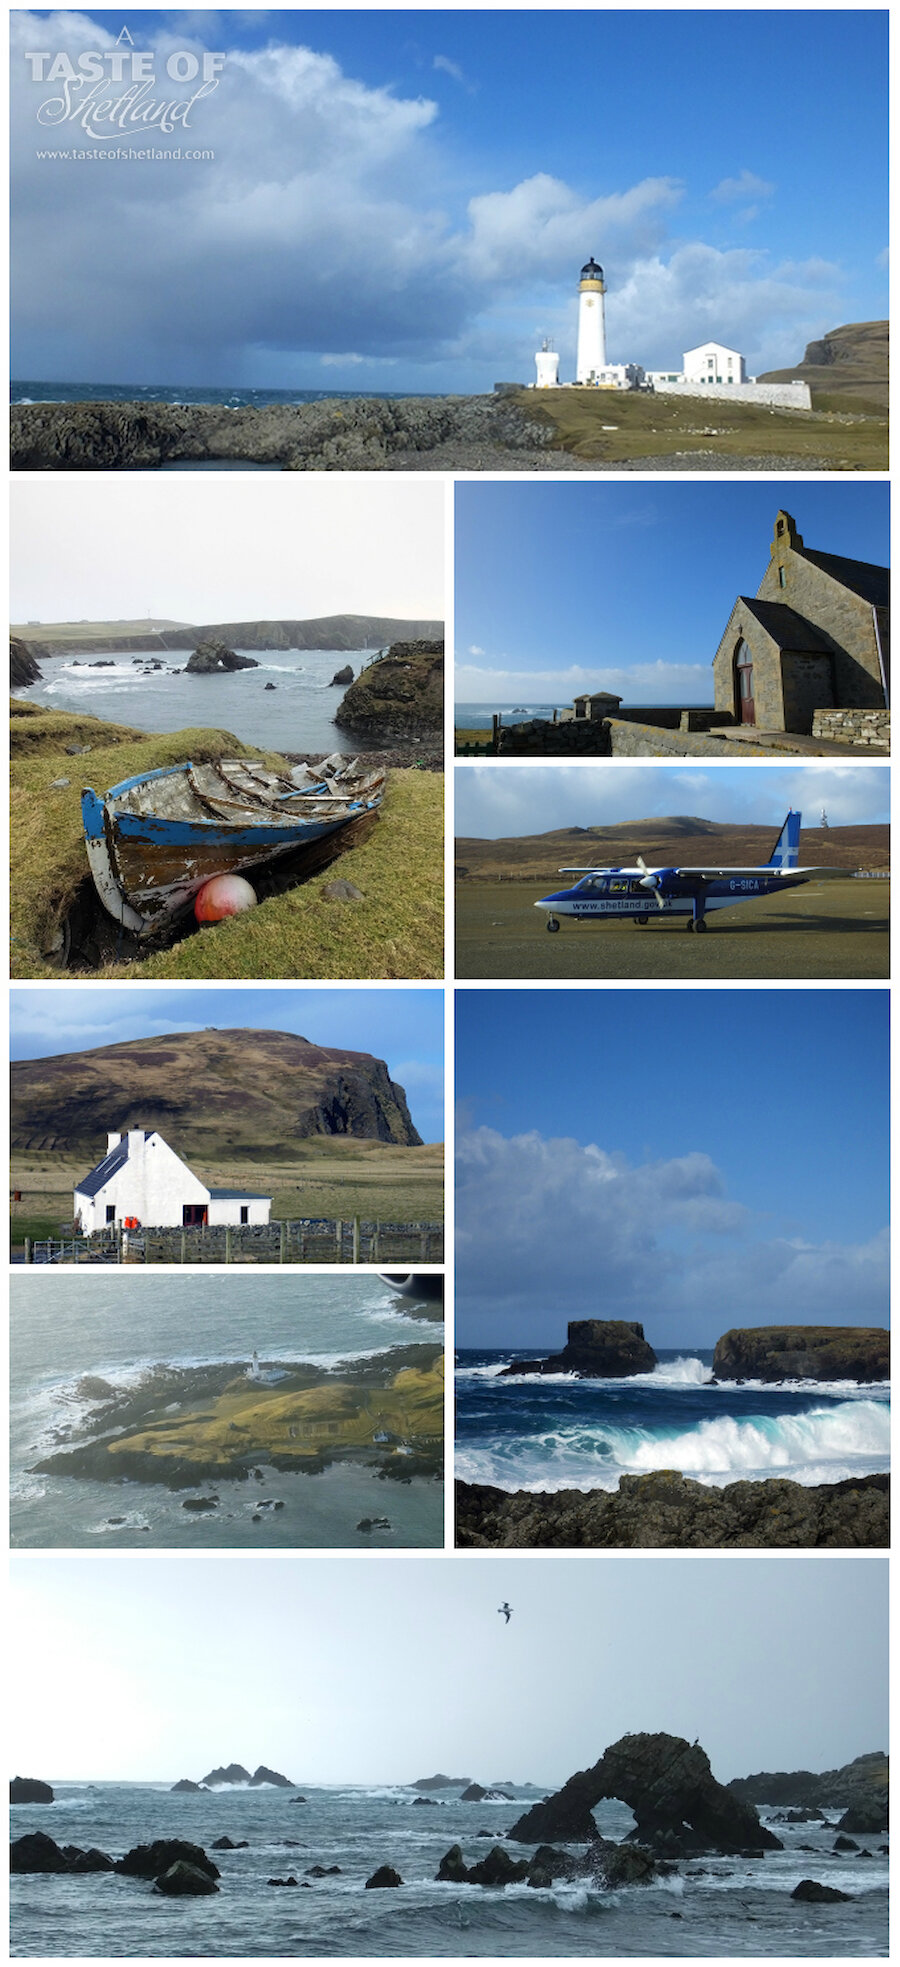 To see more scenic Fair Isle photos and read about my personal adventure to the island read my travel post on Elizabeth’s Kitchen Diary.